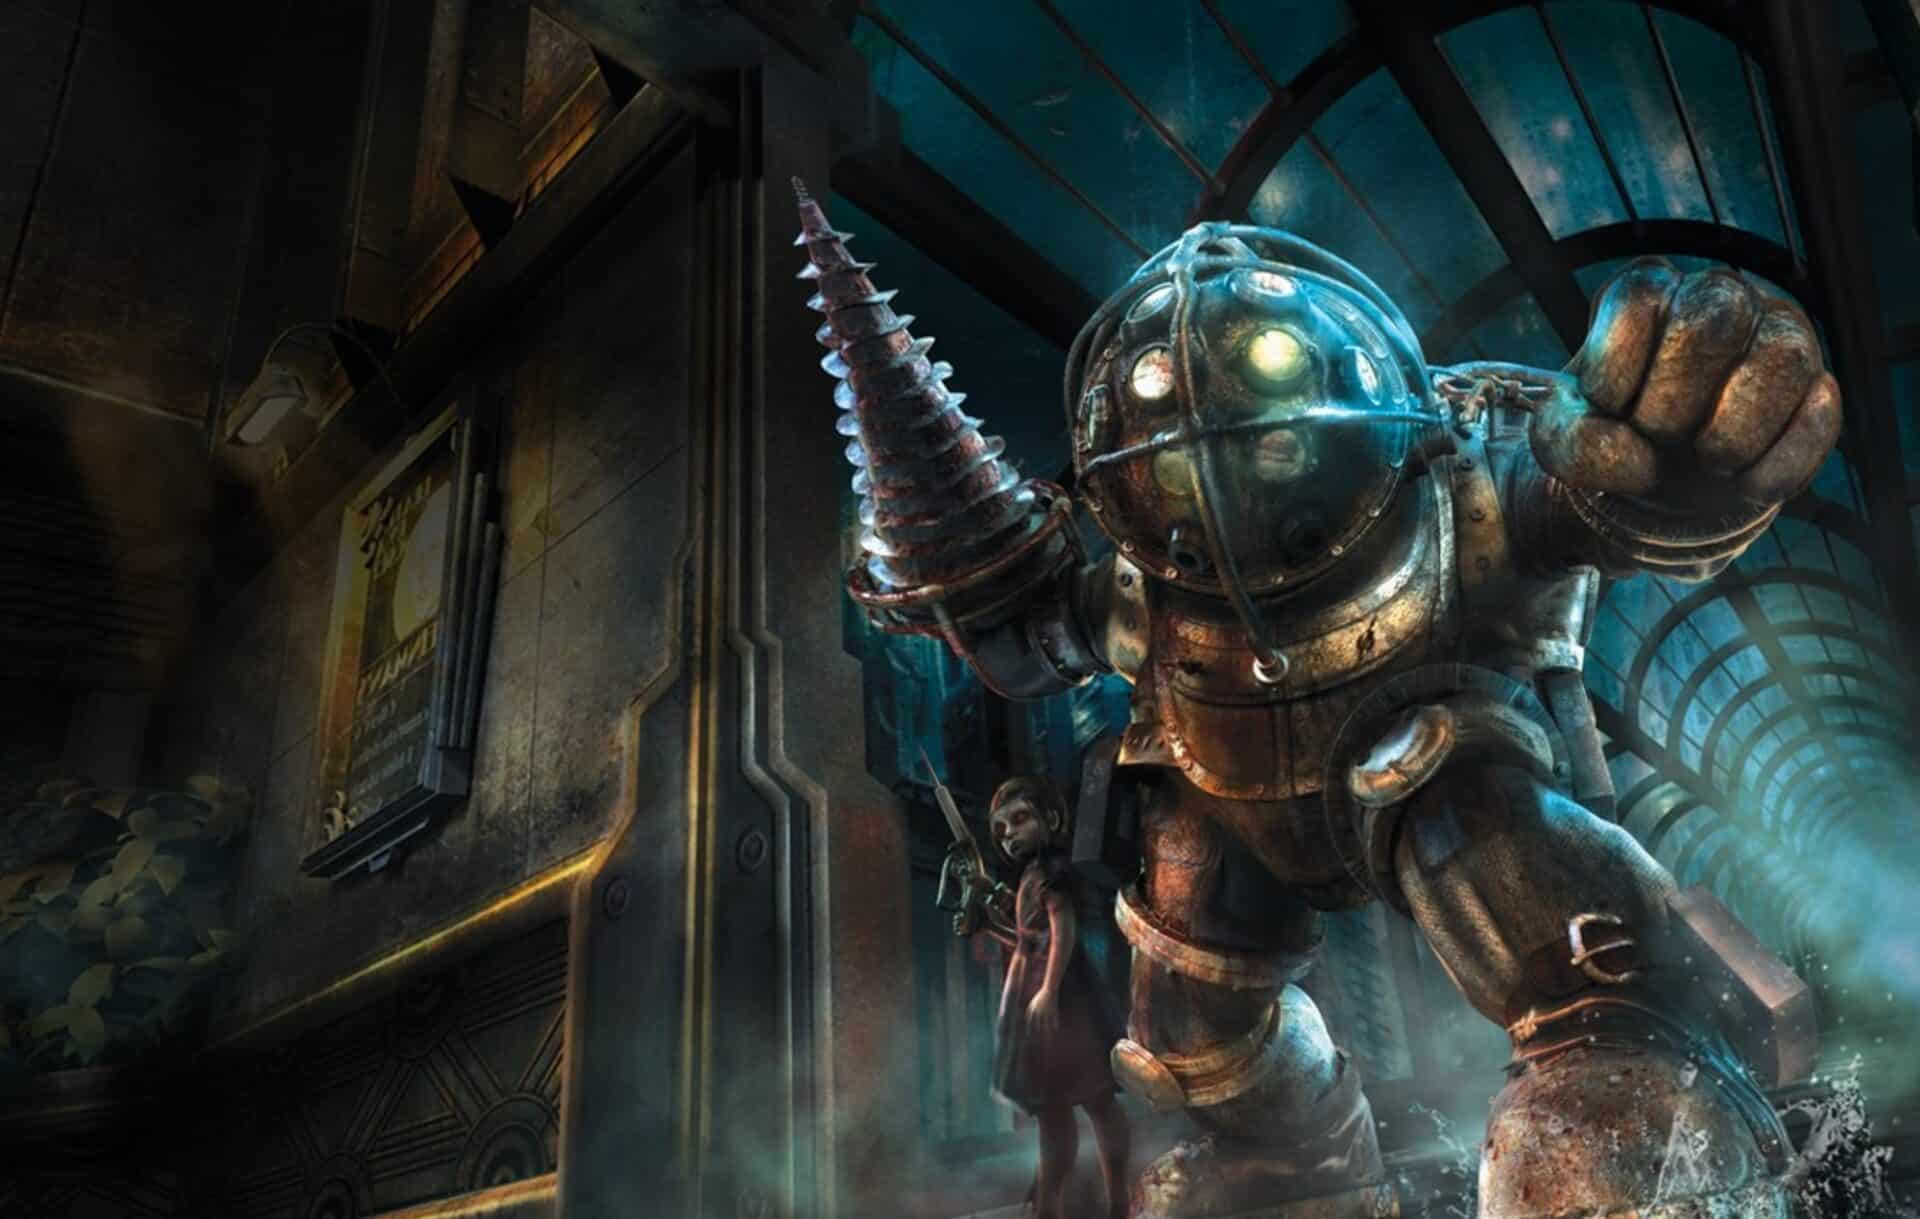 Bioshock Original image of Big Daddy and Little Sister